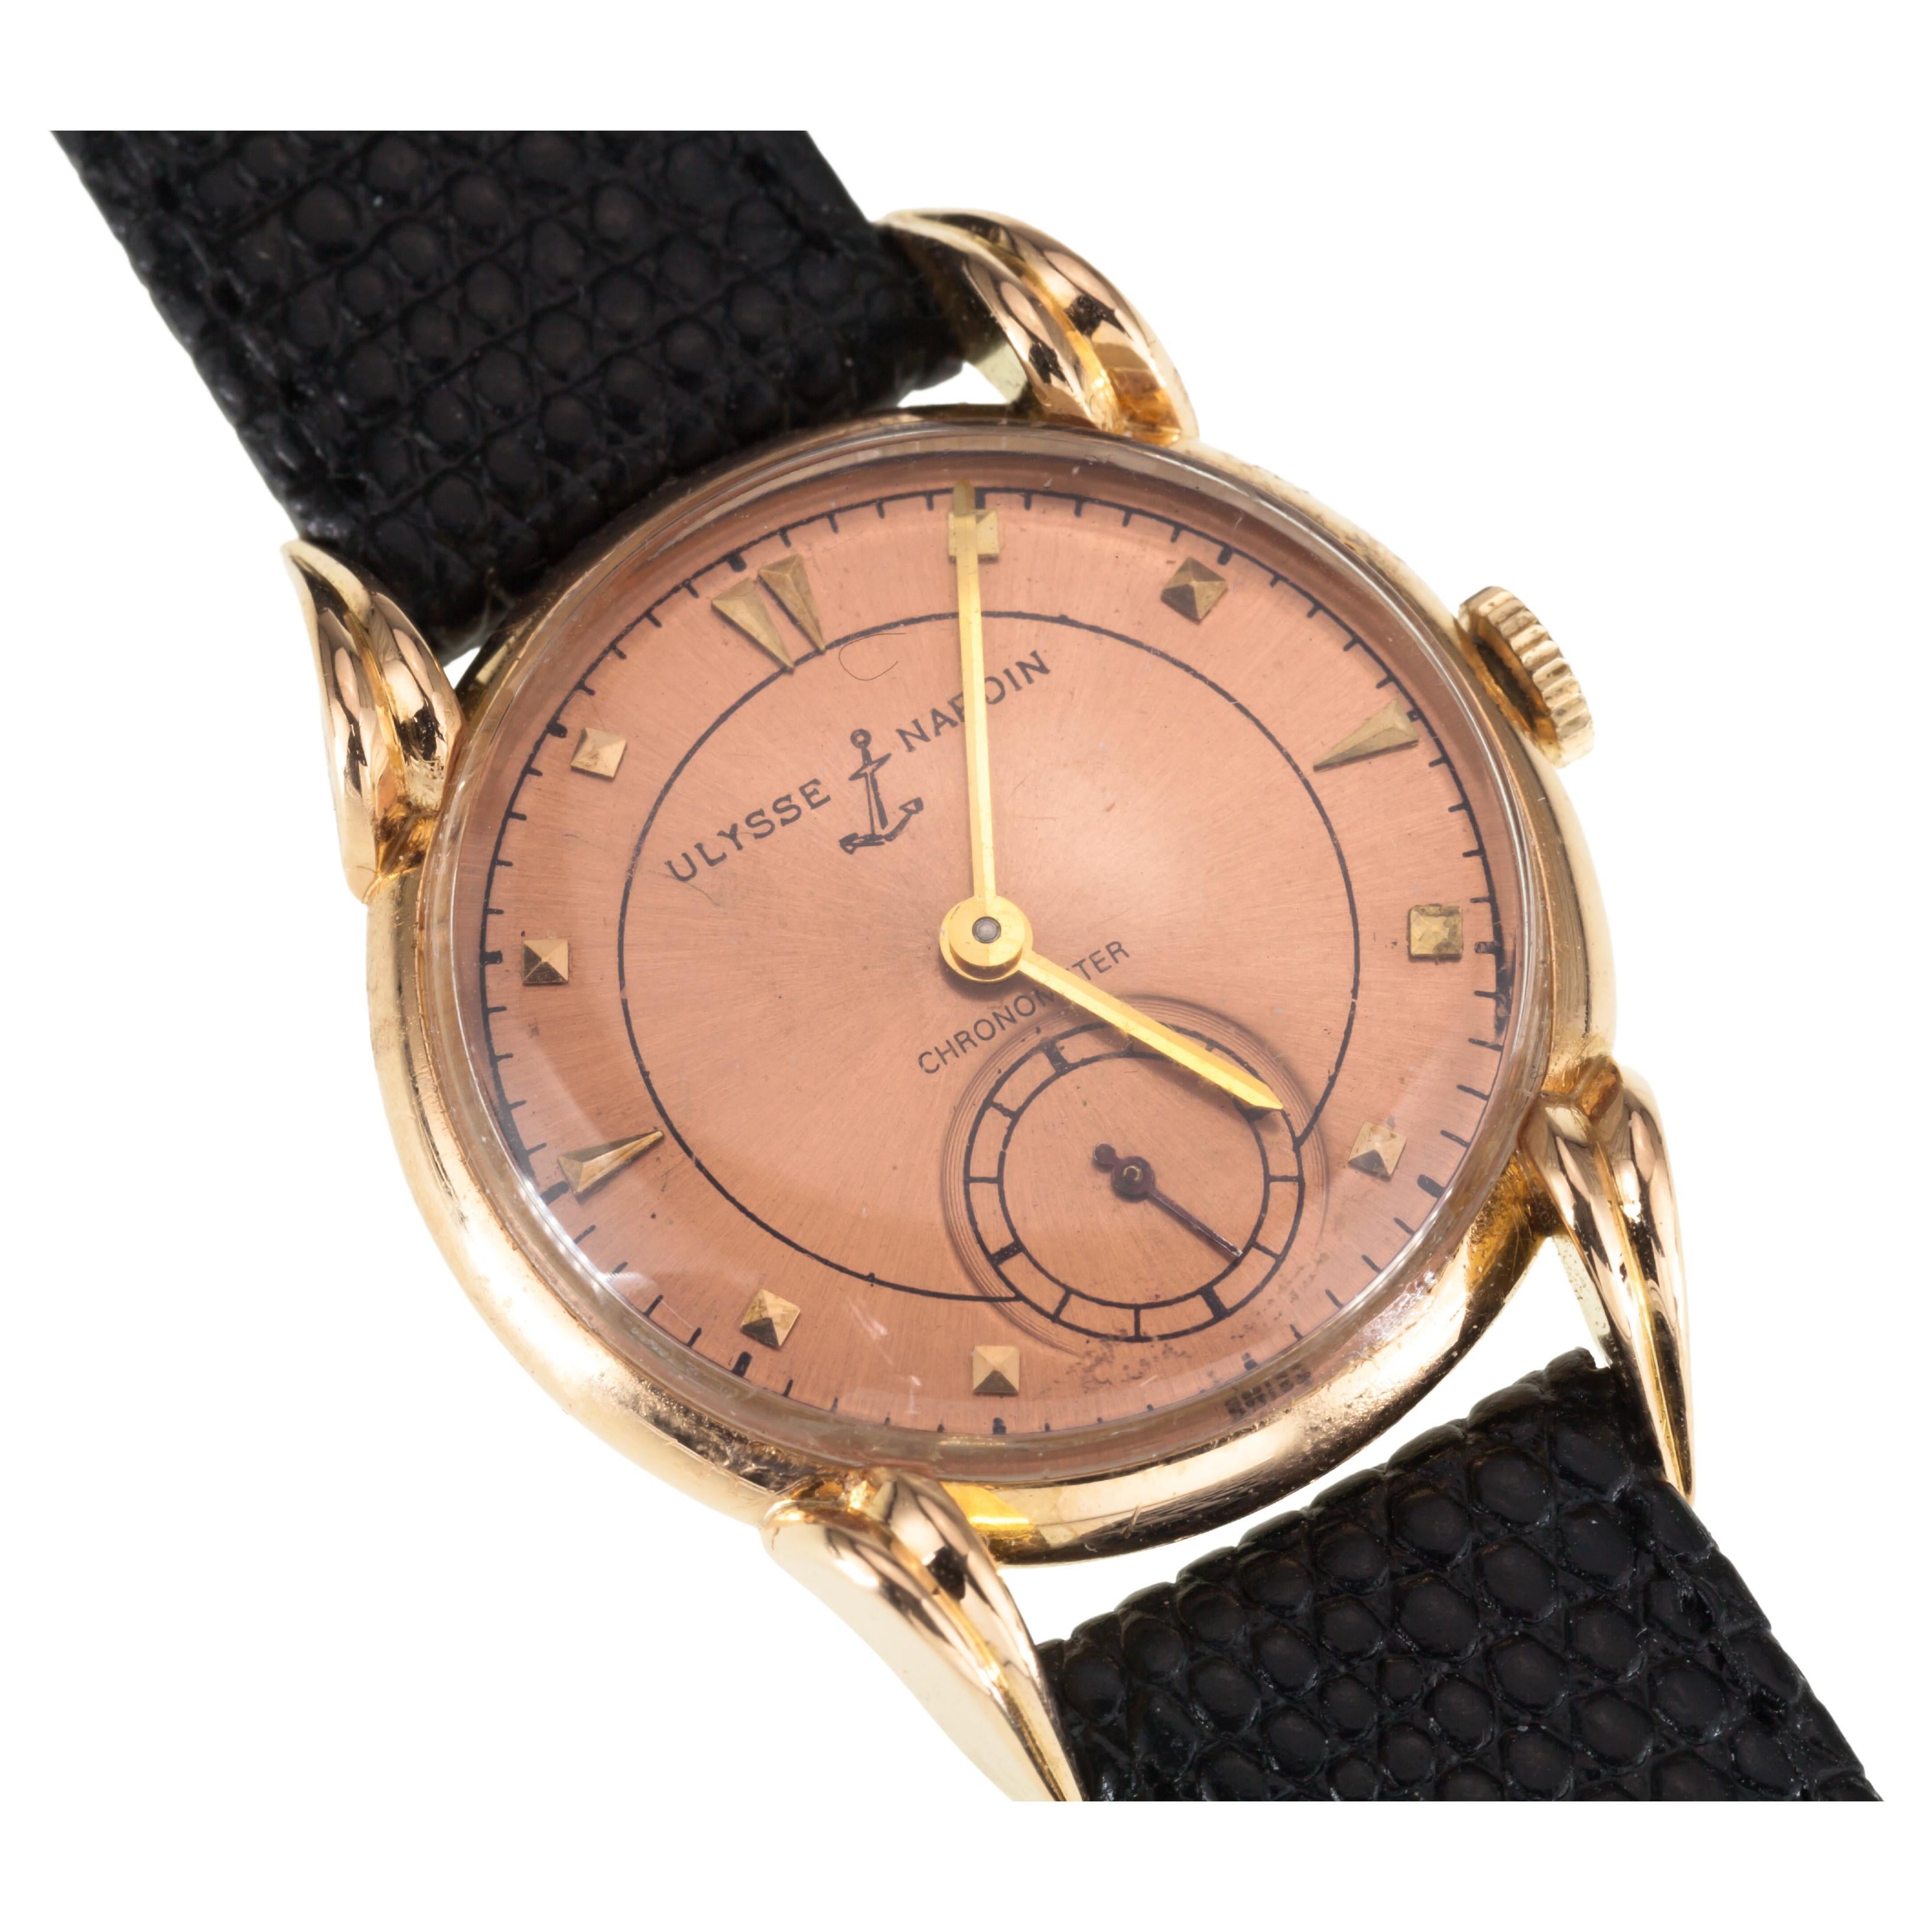 Ulysses Nardin 18k Rose Gold Chronometer Manual Wind Watch w/ Leather Band

Movement #512842
Case #623658
18k Rose Gold Case w/ Fancy Lugs

28 mm in Diameter (30 mm w/ Crown)
Lug-to-Lug Distance = 38 mm
Lug-to-Lug Width = 15 mm
Thickness = 9